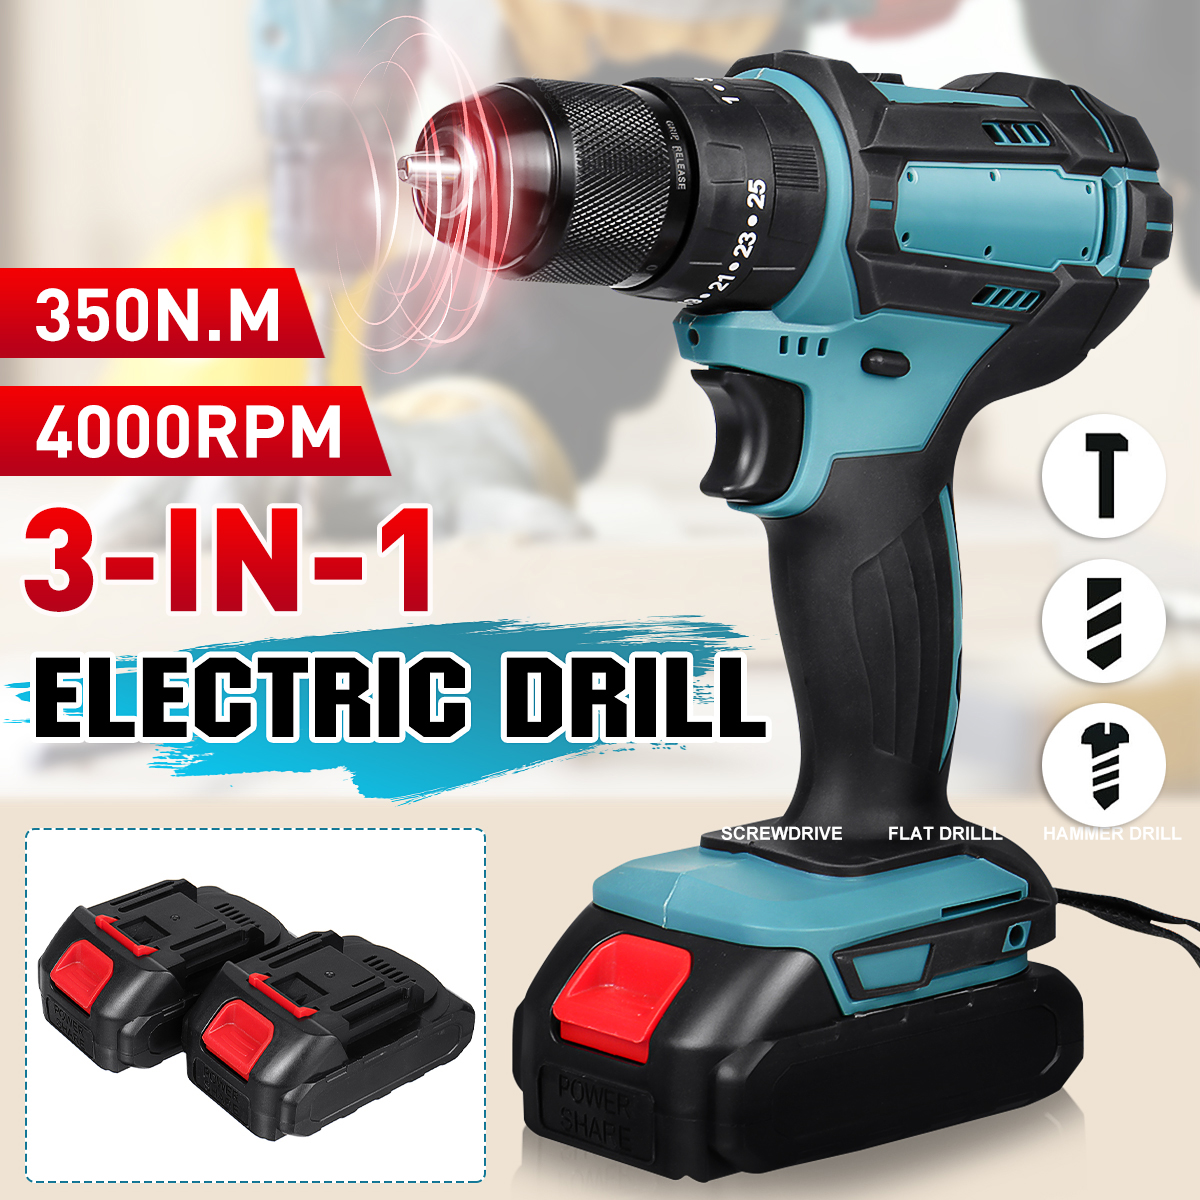 350Nm-4000-rpm-Electric-drill-3-In-1-Hammer-Flat-Drill-Screwdriver-Churn-Drill-with-Battery-1955074-1